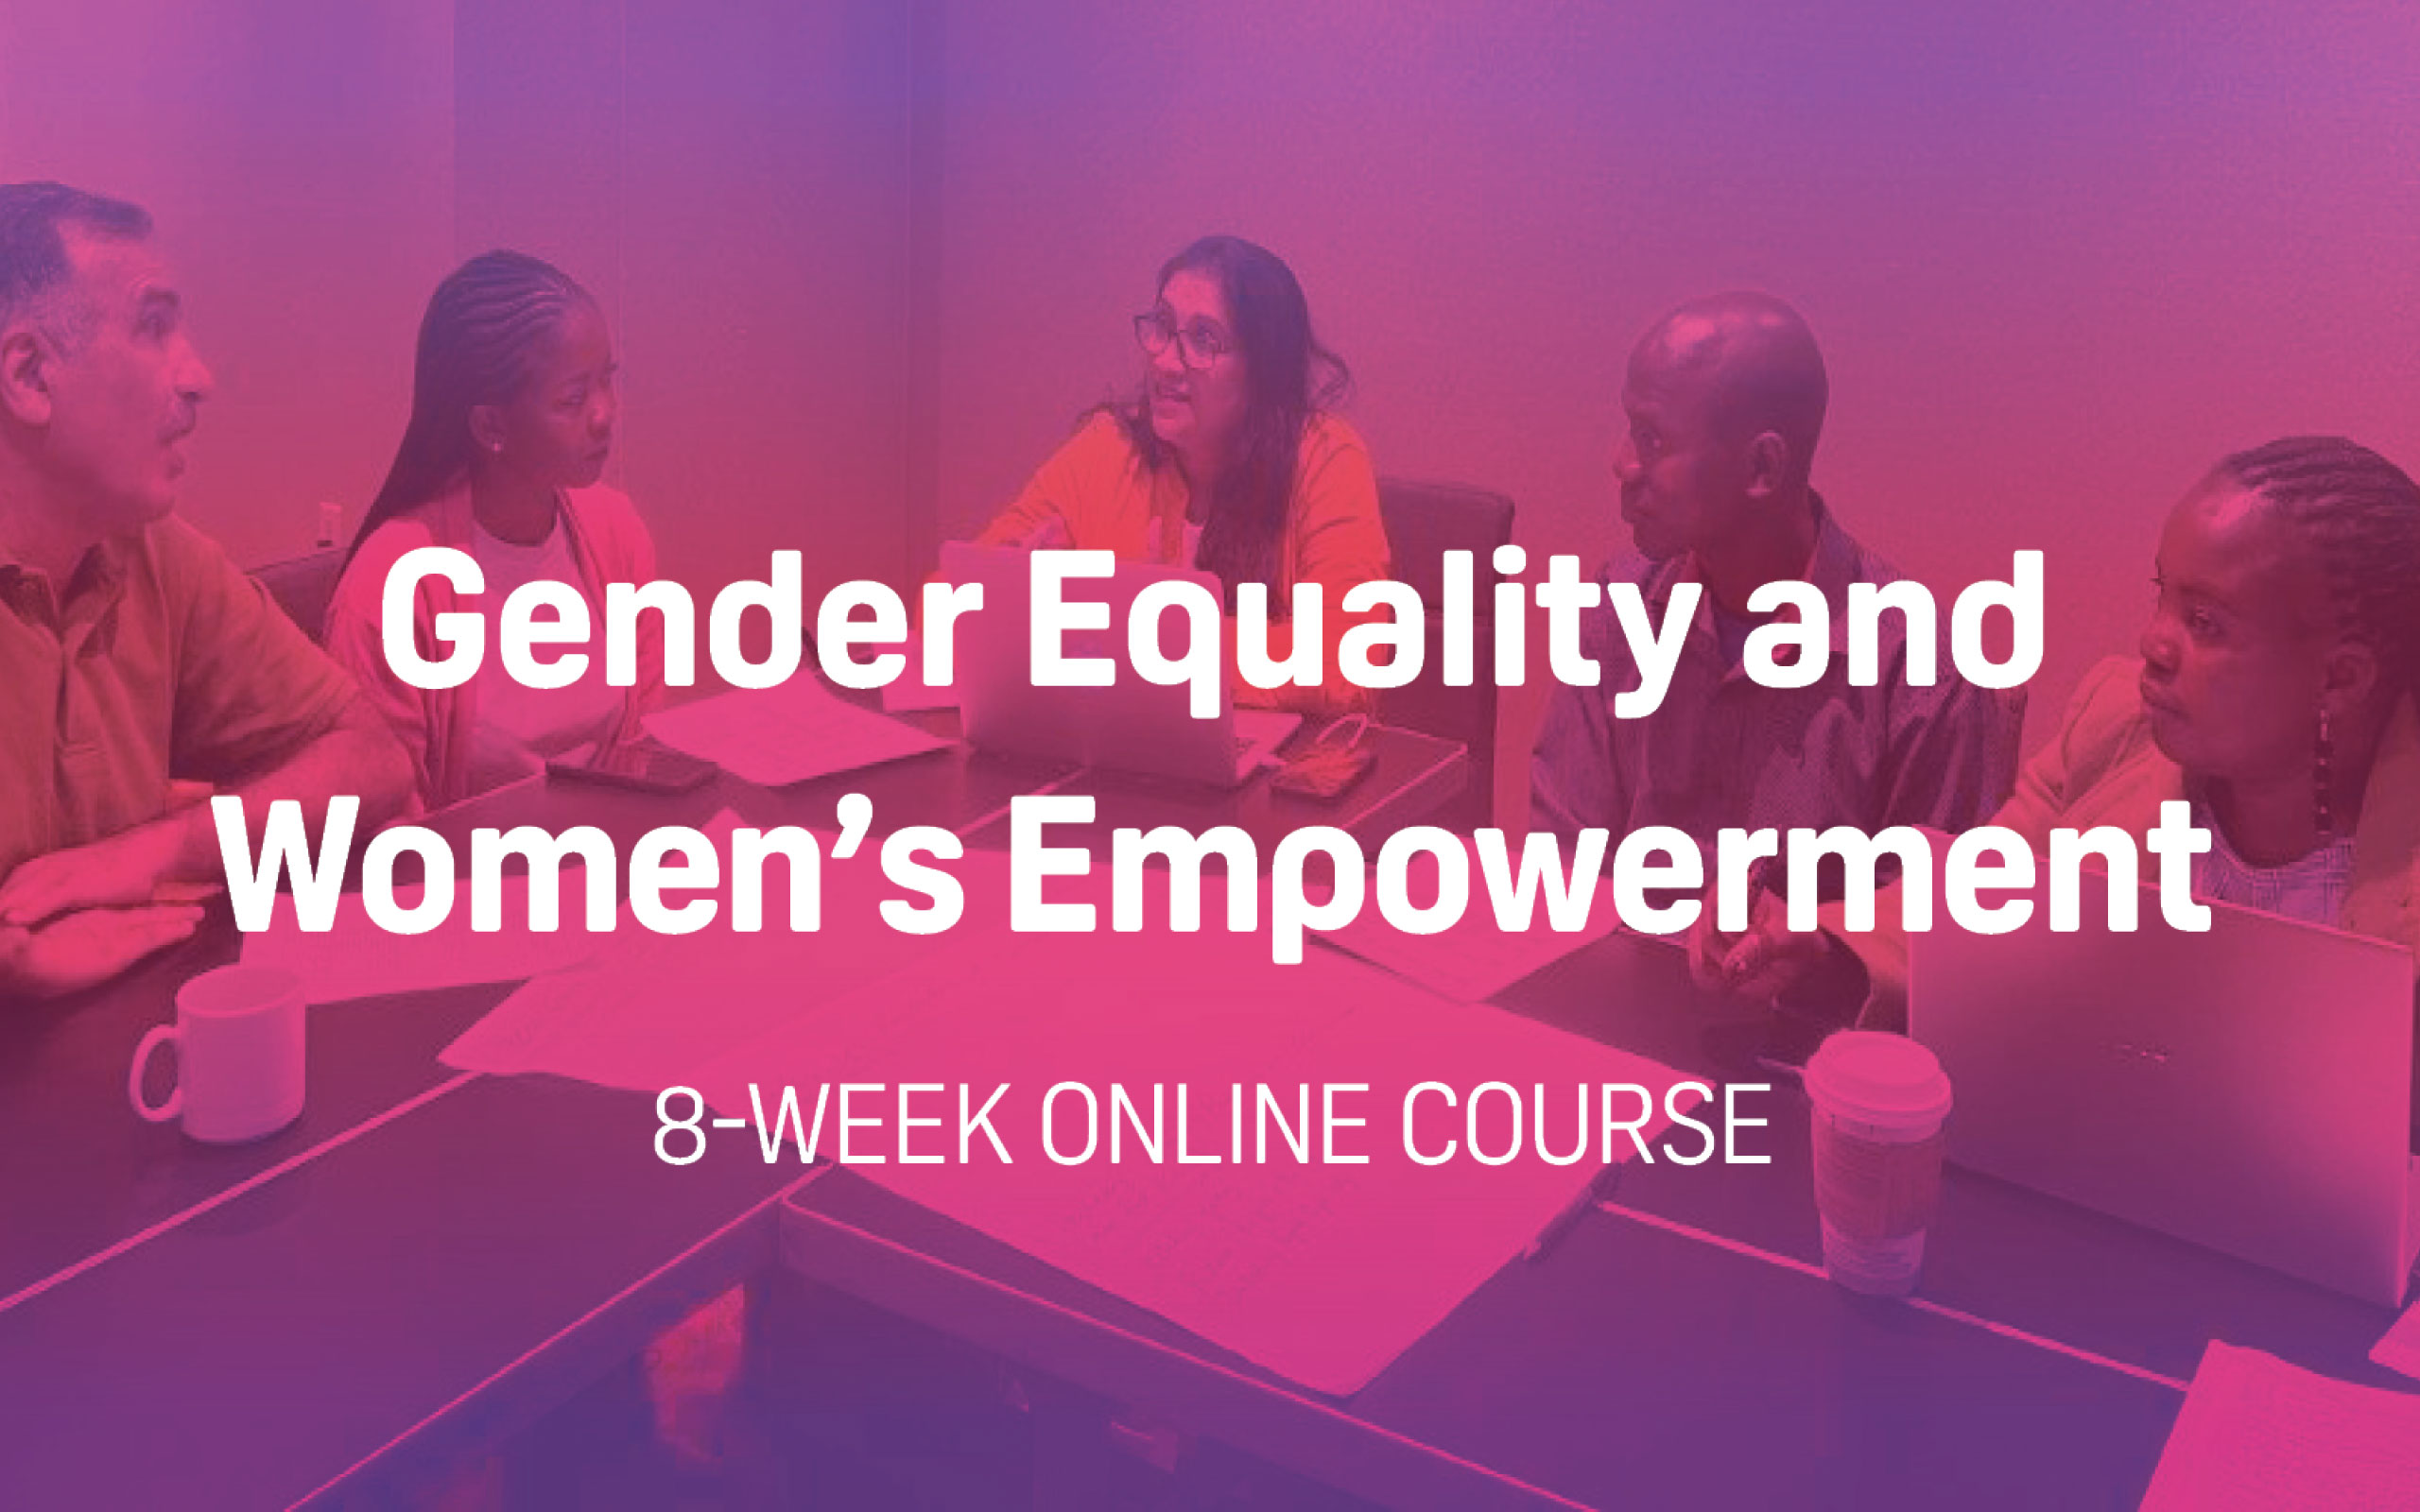 COL online course alert: Capacity Building in Gender Equality and Women's Empowerment starts October 2022 - Commonwealth of Learning